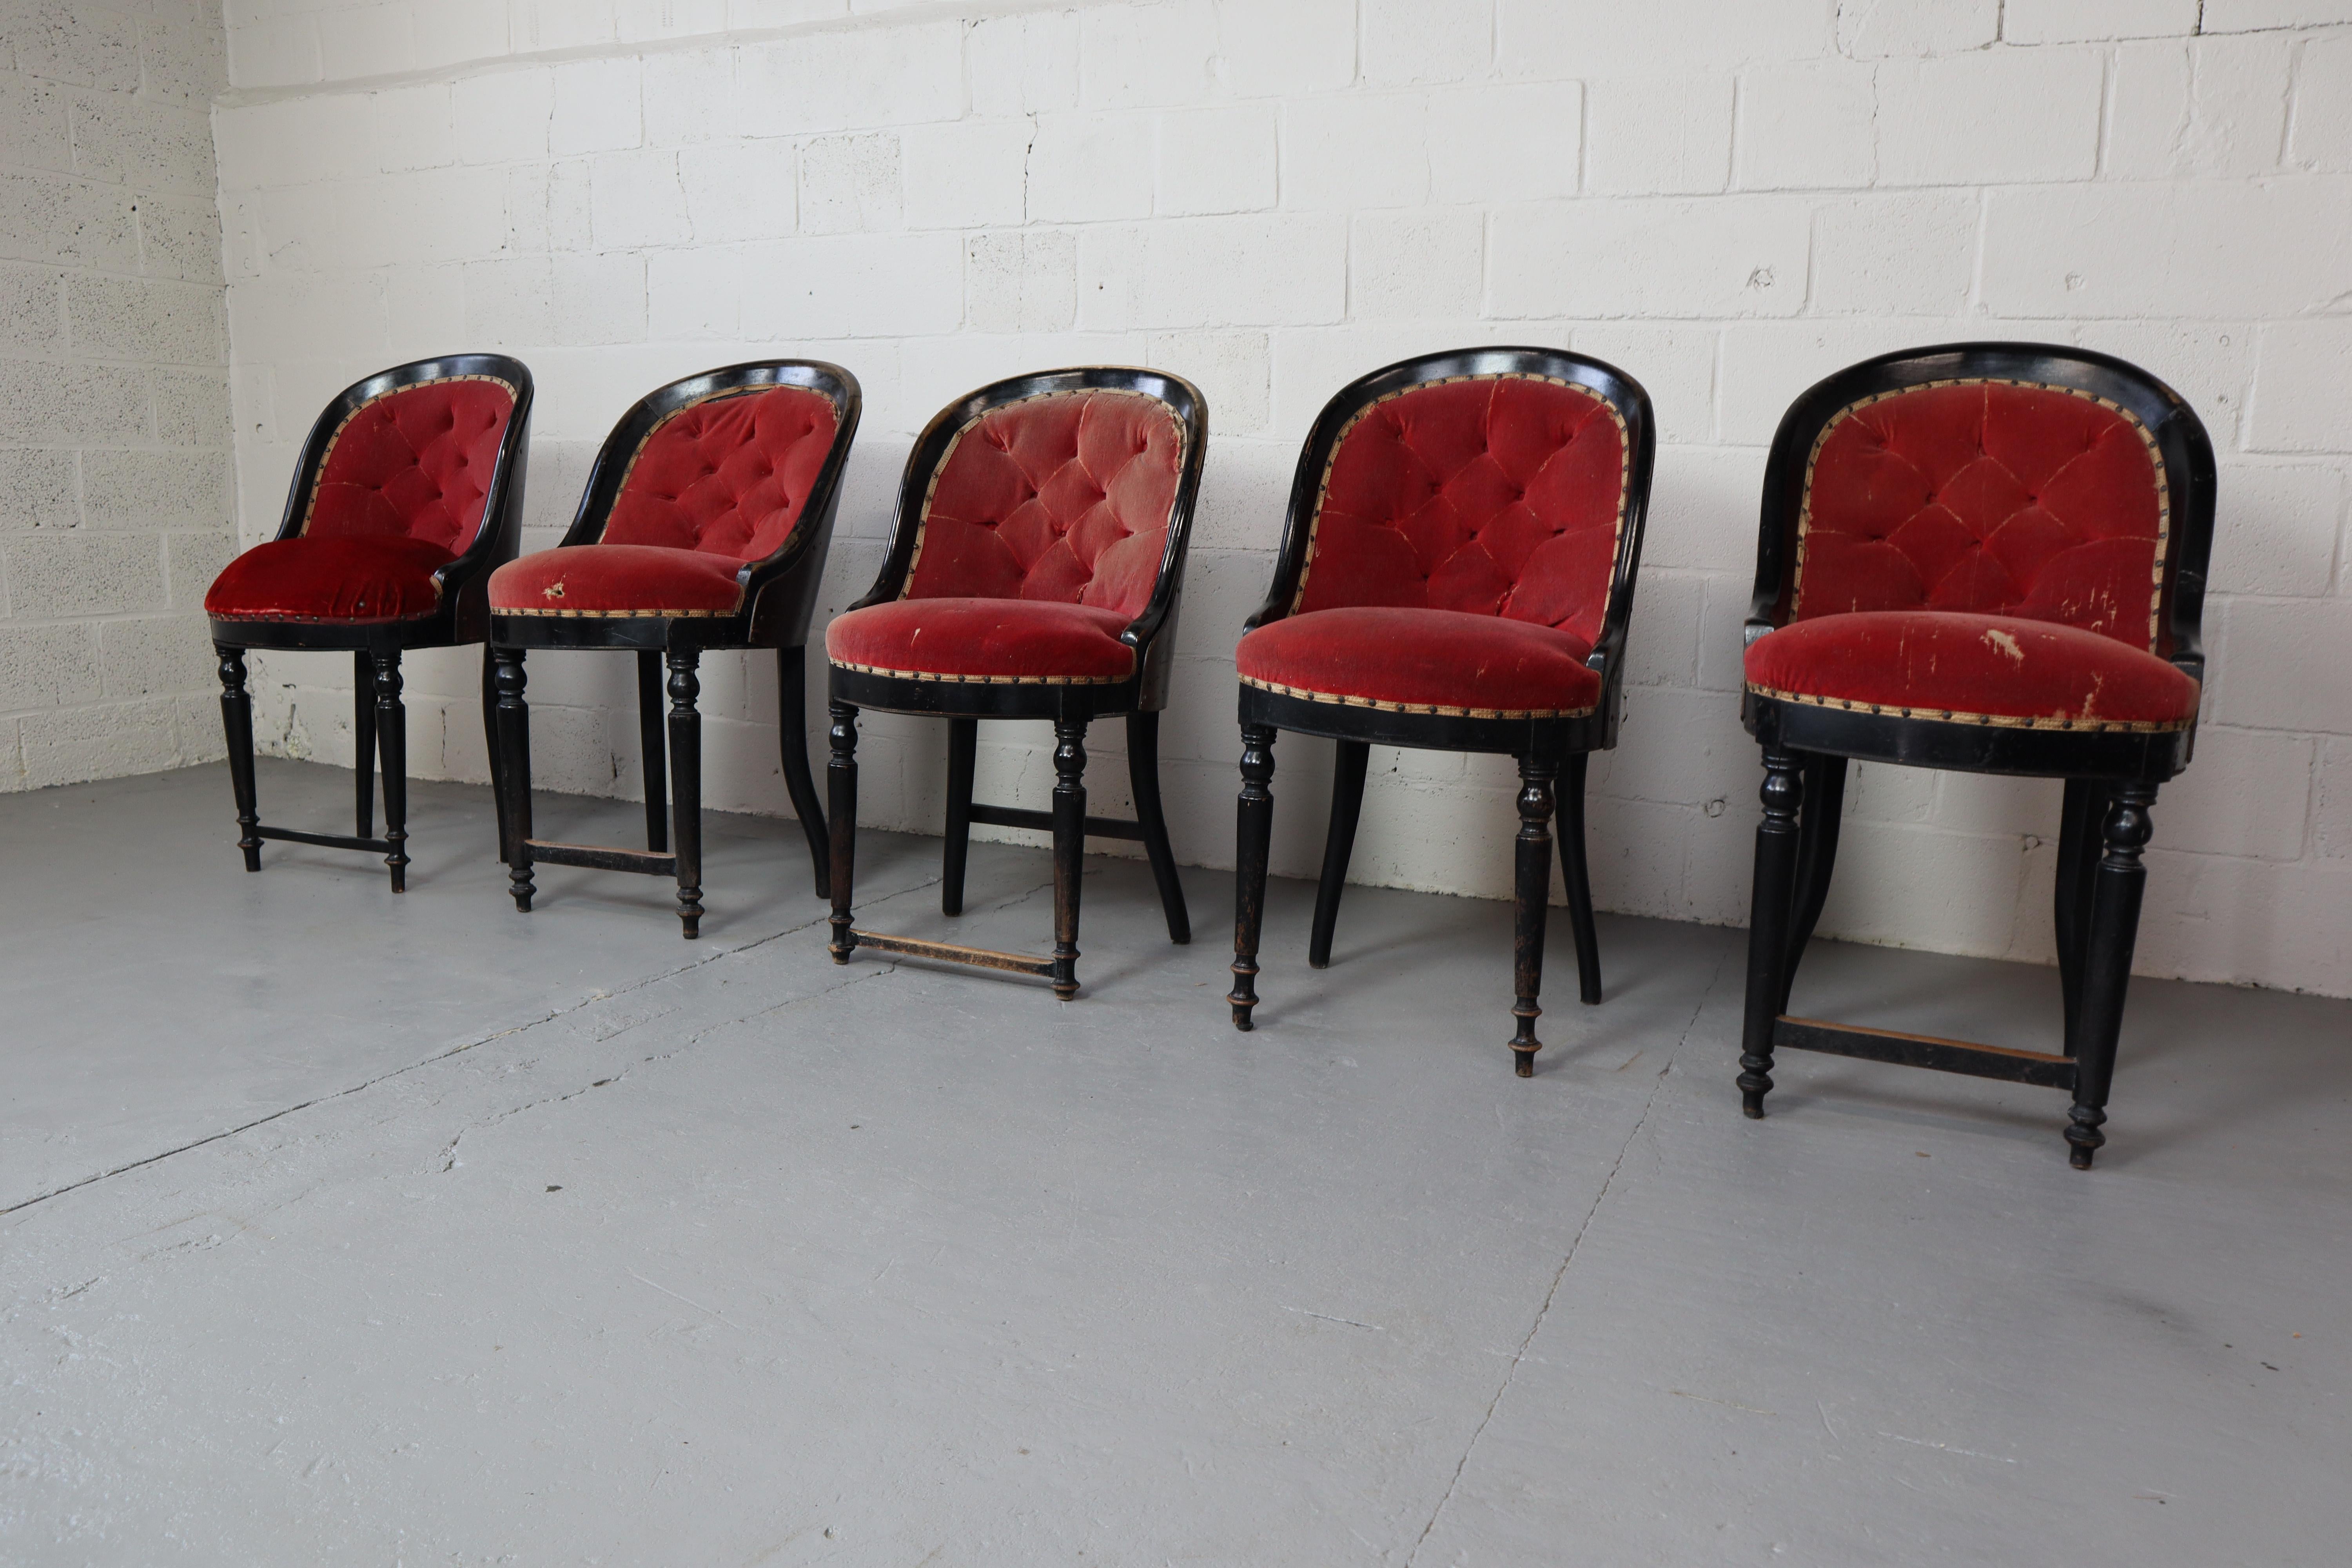 Set of five antique theater chairs, with a nice patina! Original upholstery in red velvet!
they come from an old theater in Bruges (Belgium).